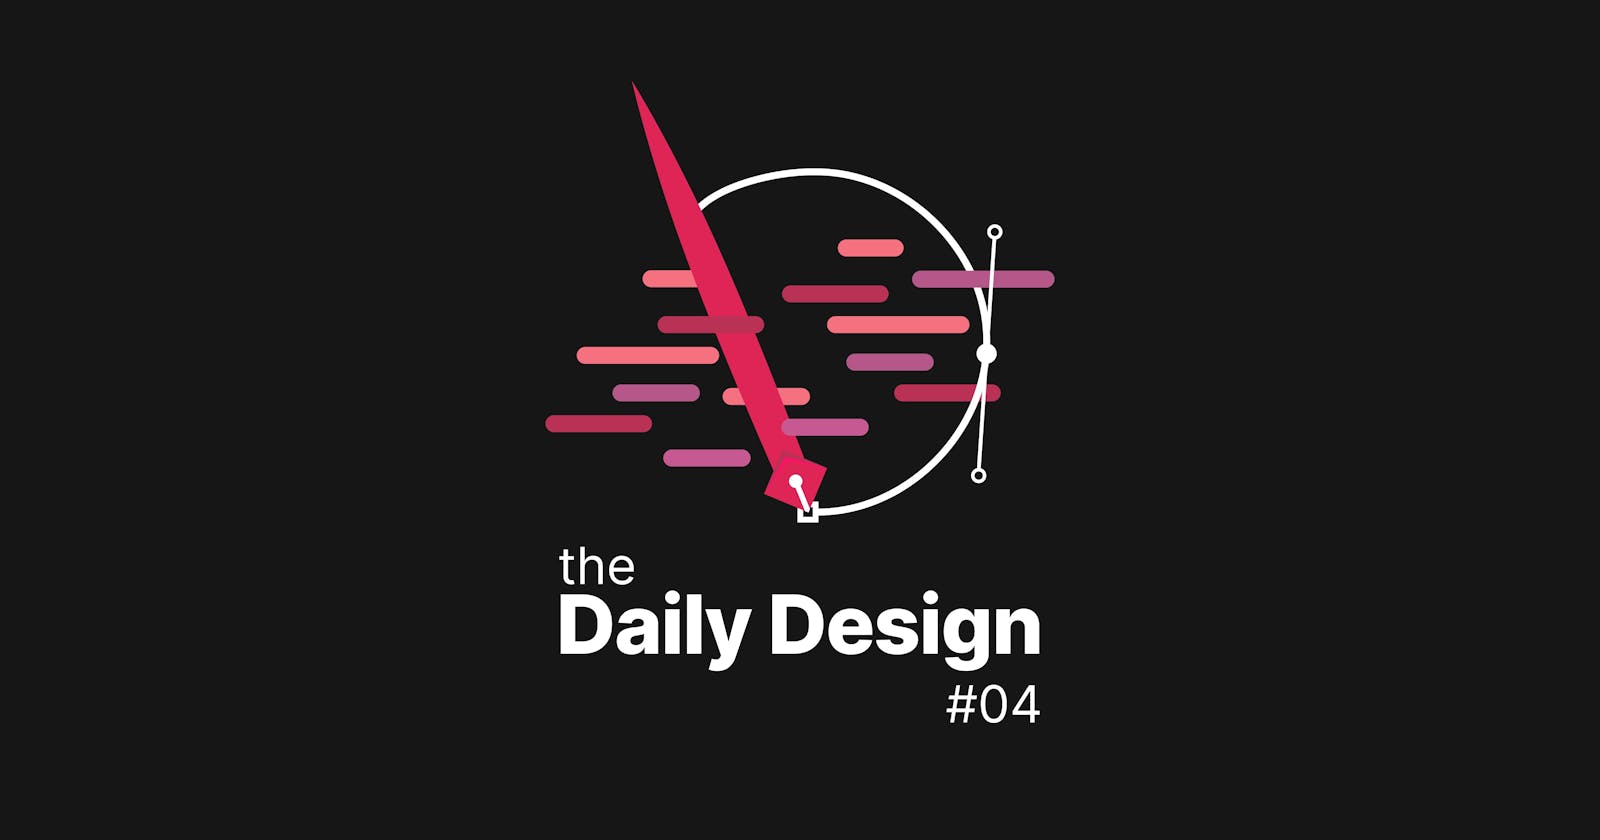 The Daily Design #04